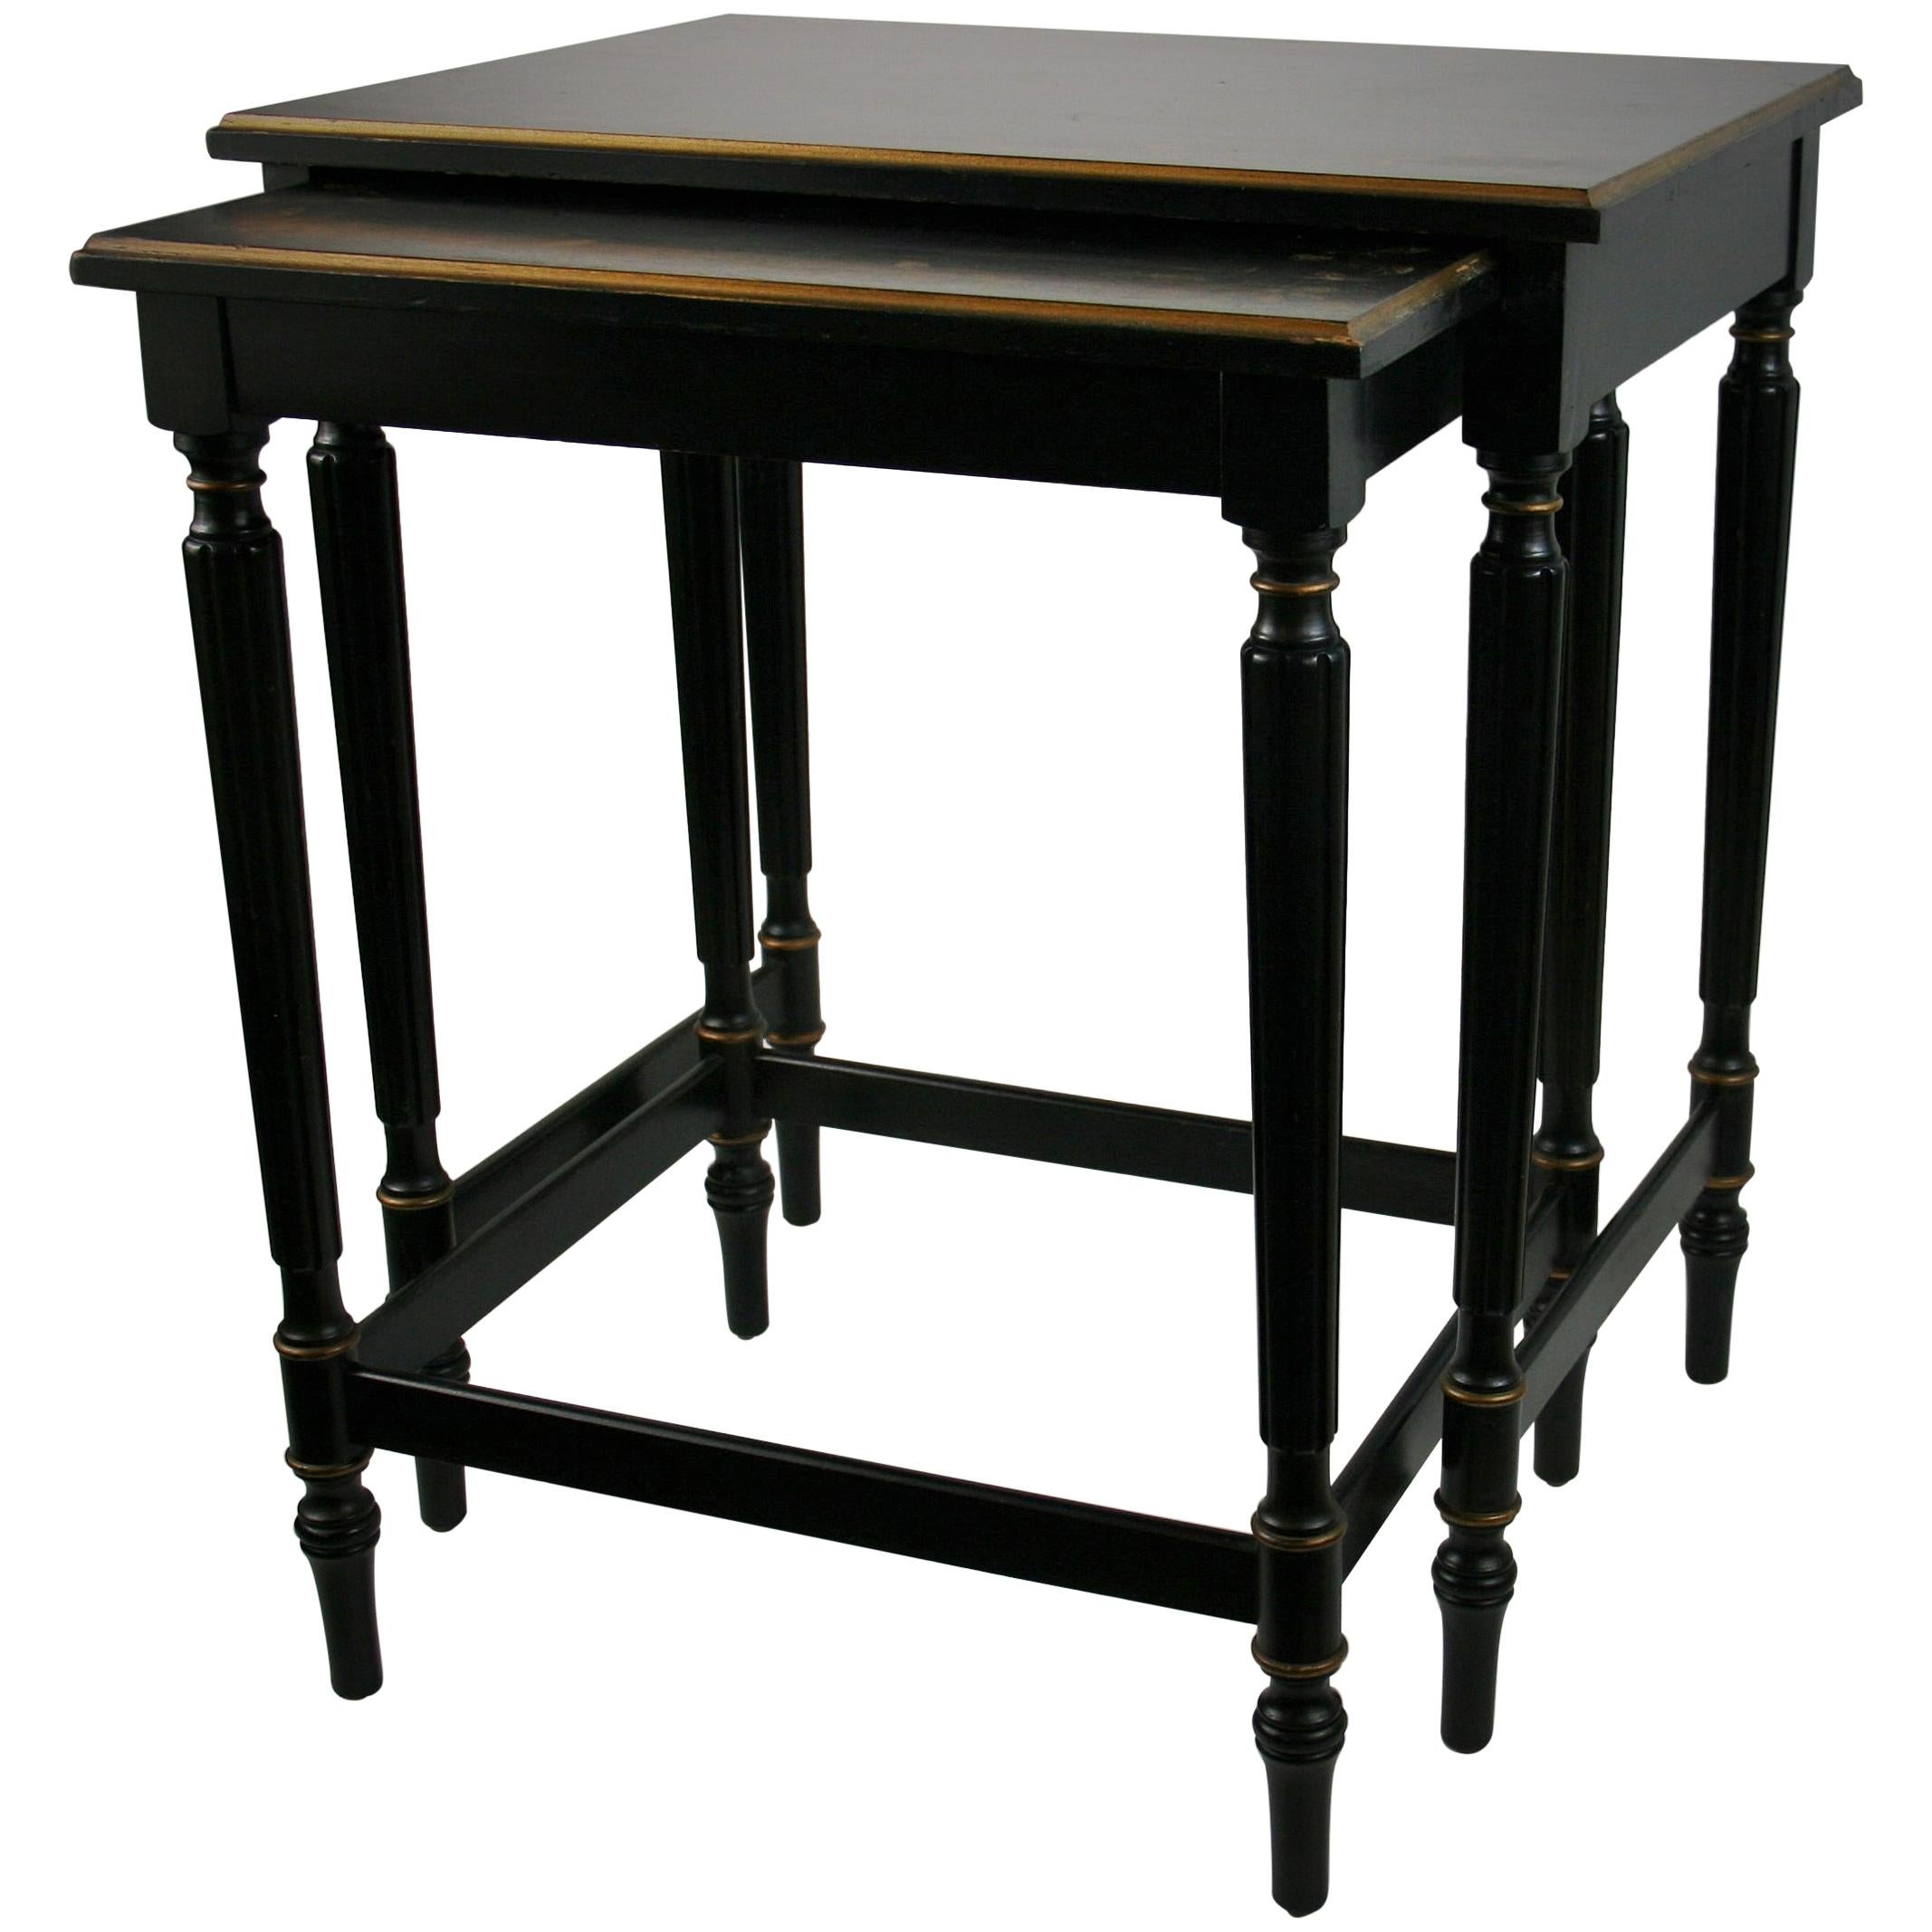 Set of Black Nesting Tables with Gilt Floral Design by Imperial Furniture